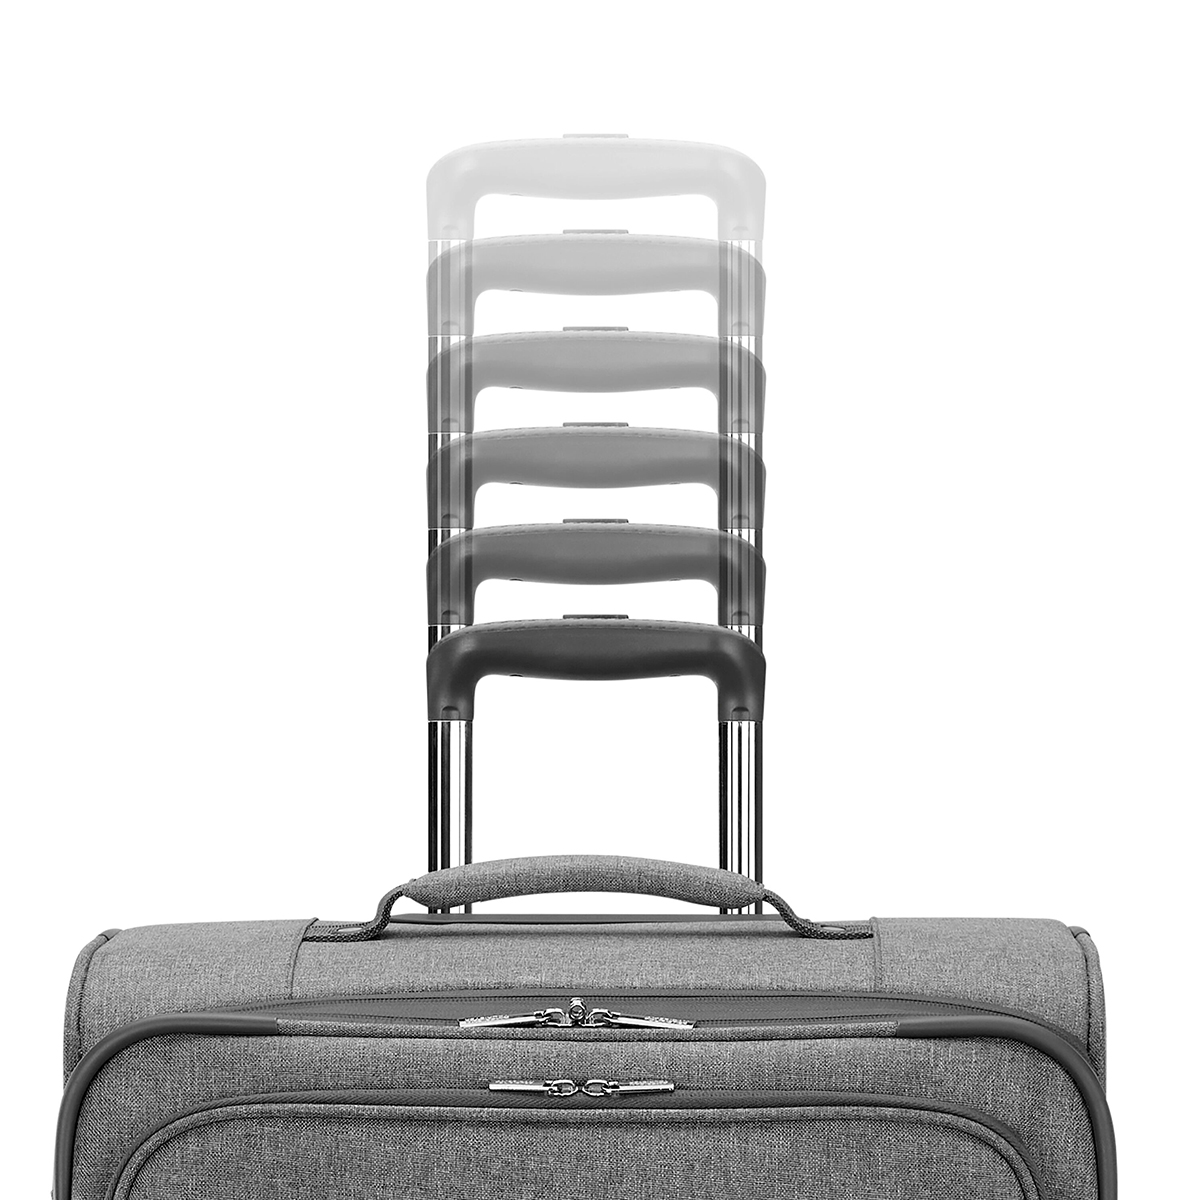 American Tourister(R) Whim 21in. Carry-On Spinner Luggage